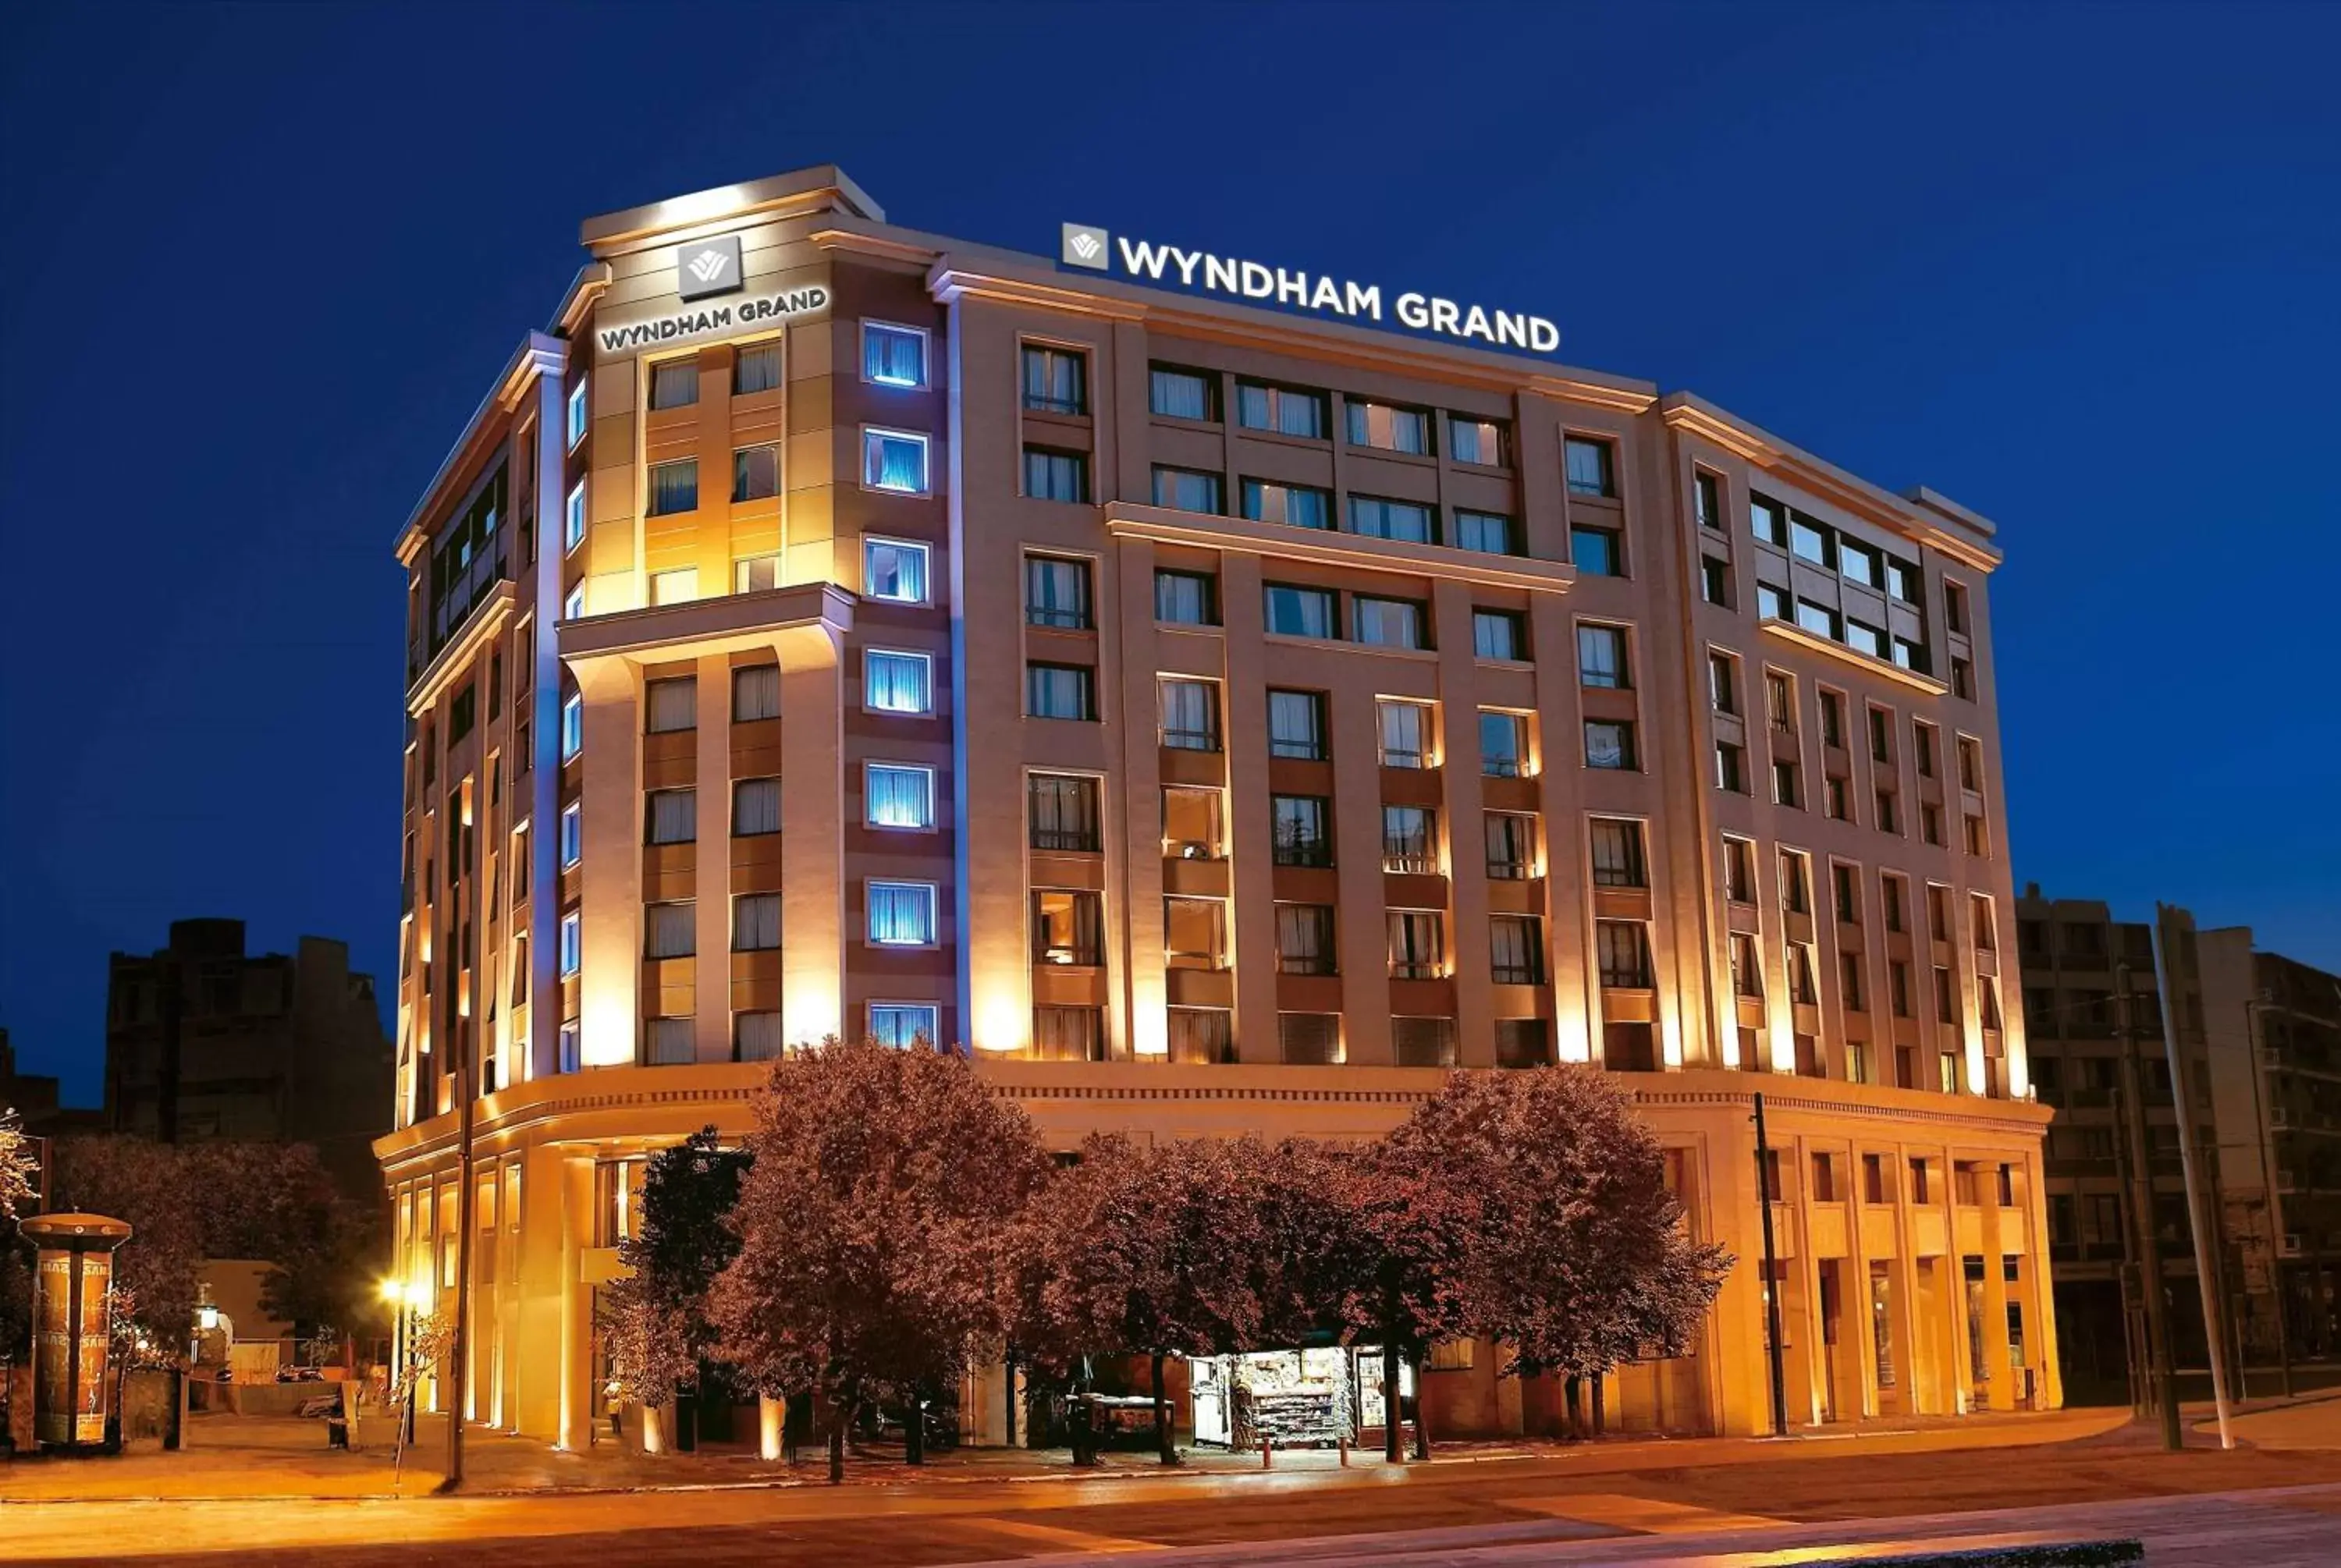 Property building in Wyndham Grand Athens